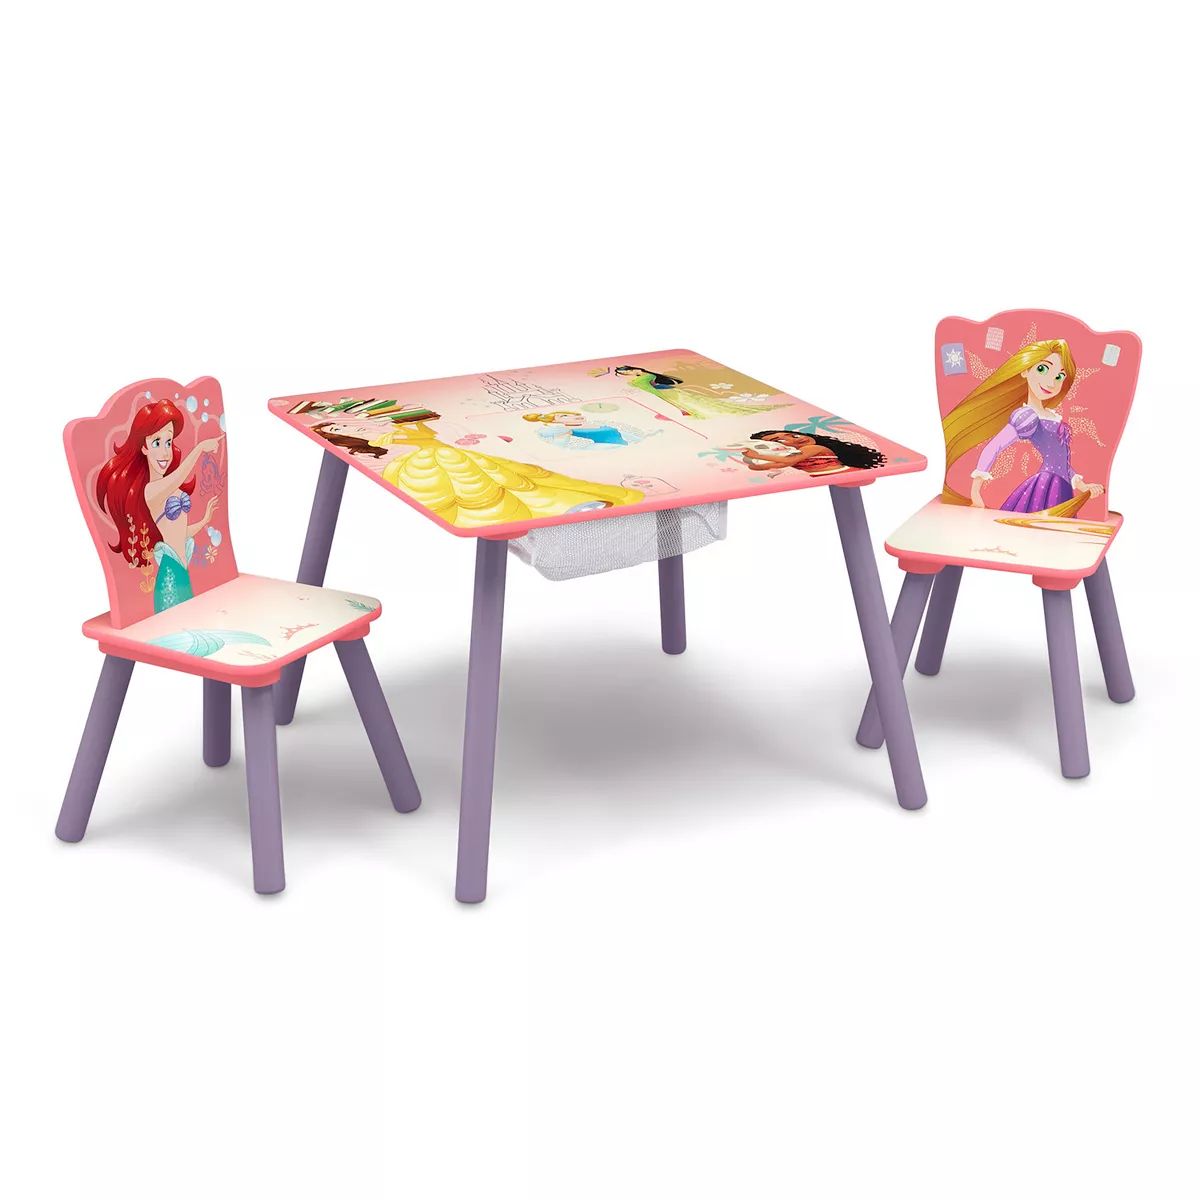 Disney Princess Table & Chairs Set by Delta Children | Kohl's